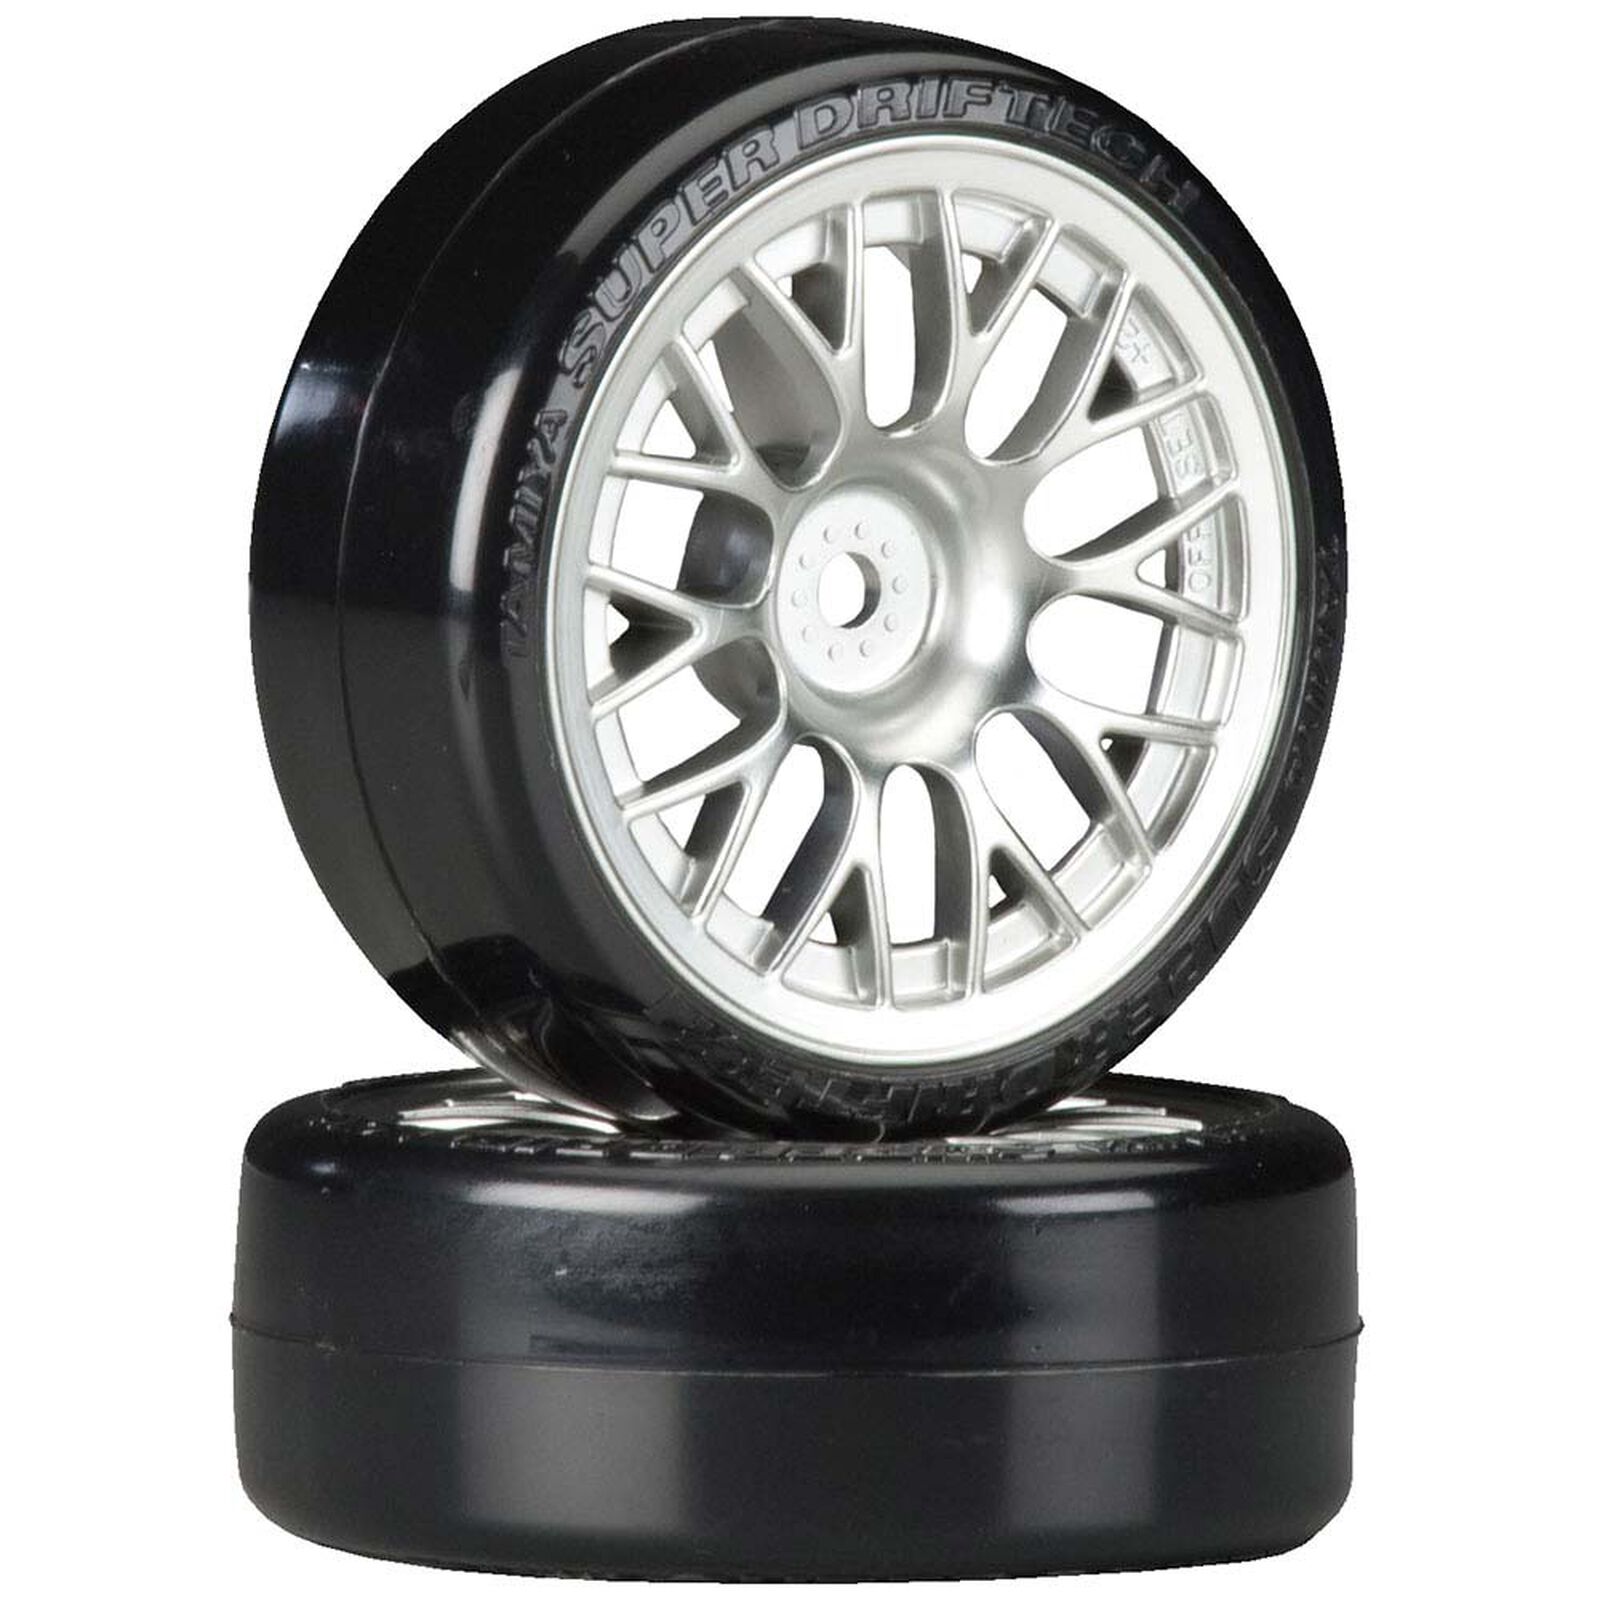 Metal Plated Mesh Wheels with Mounted Super Drift Tech Tires, 24mm (2)